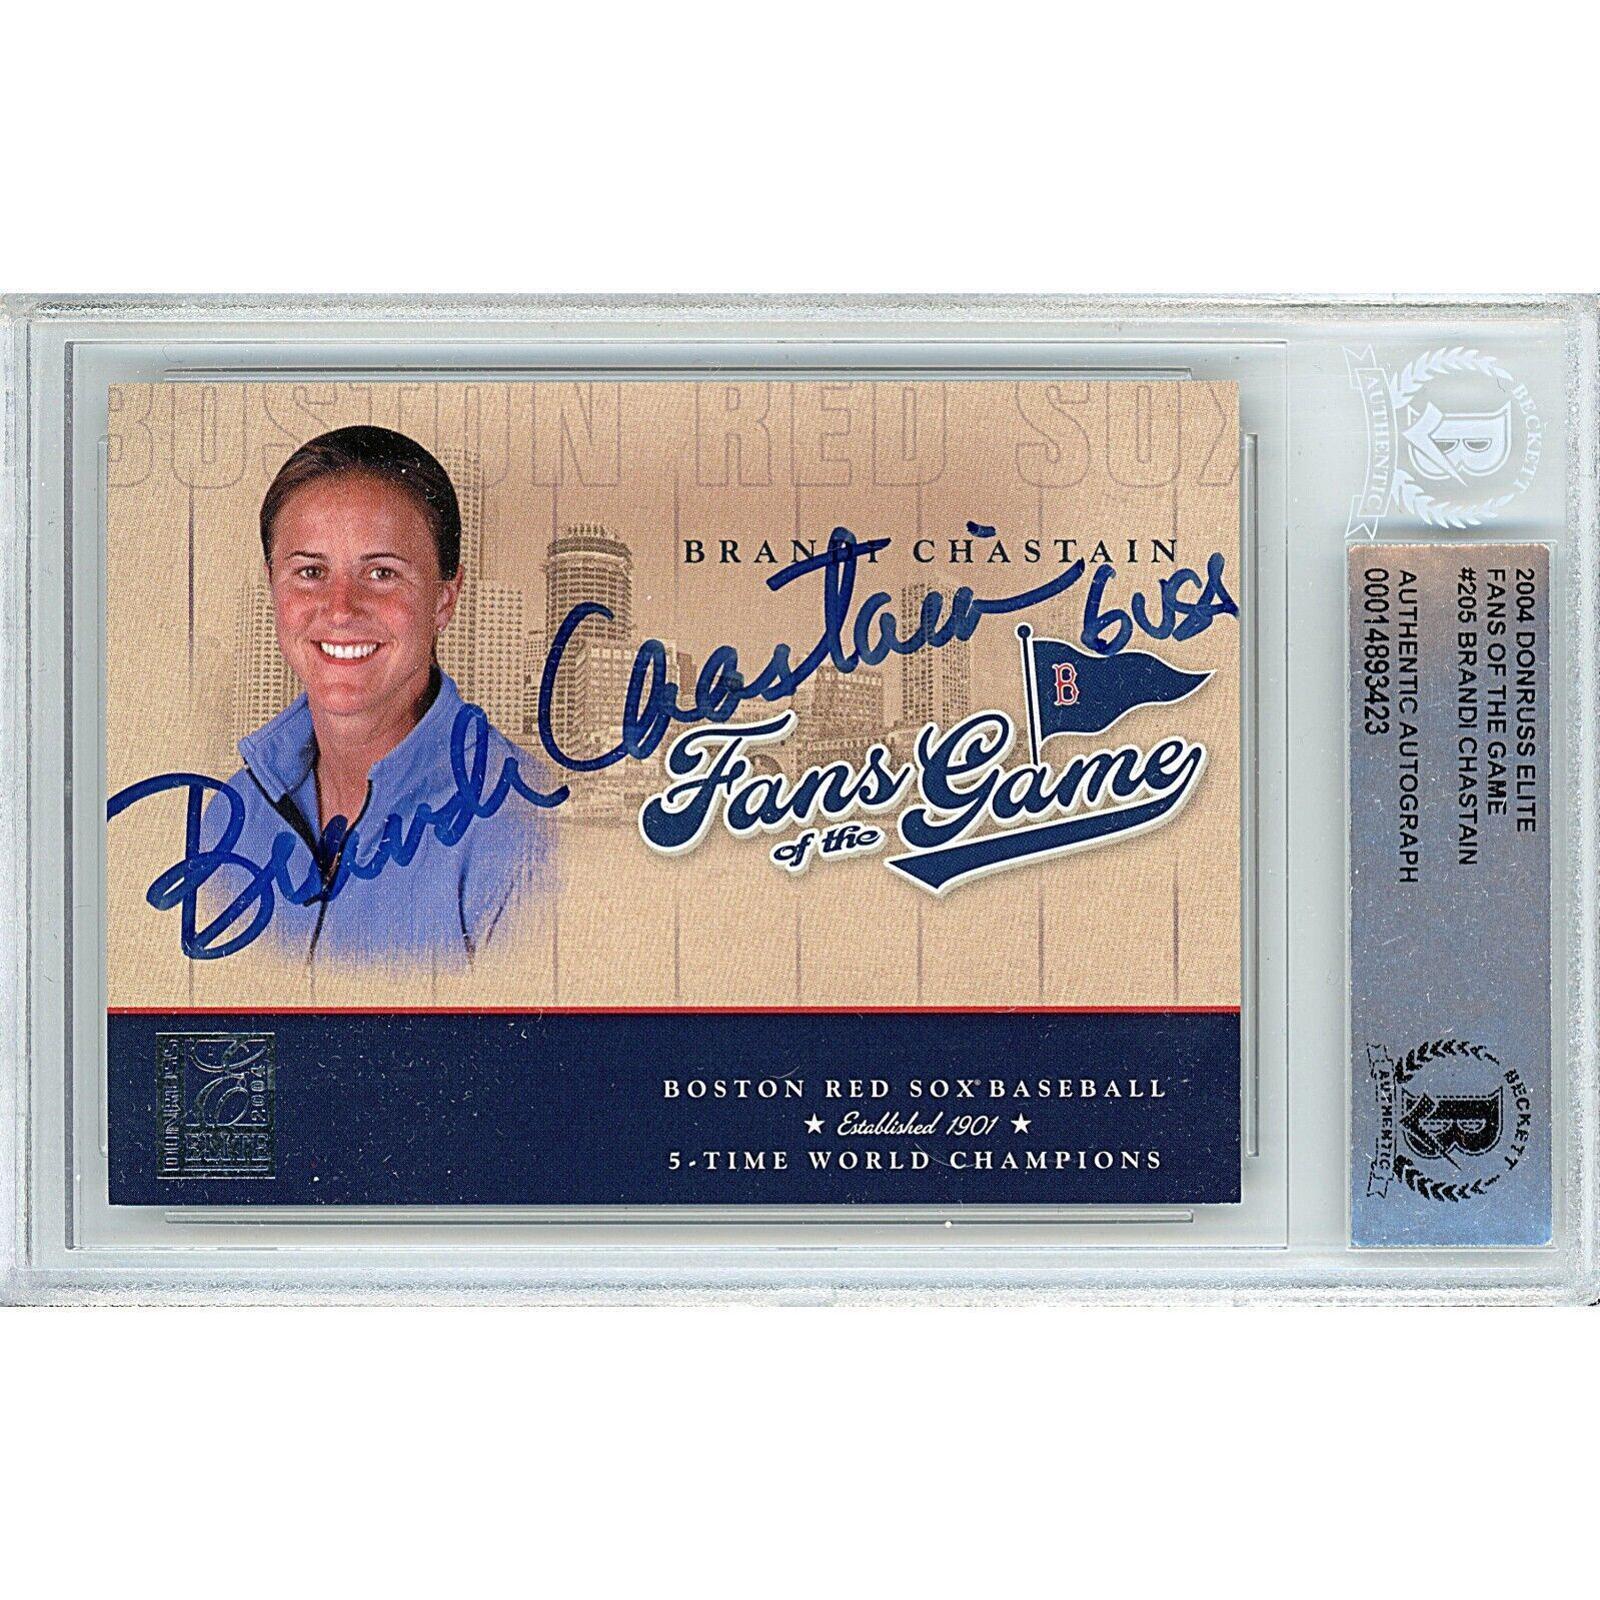 Primary image for Brandi Chastain Signed Team USA Donruss Elite USWNT Beckett BAS BGS On-Card Auto